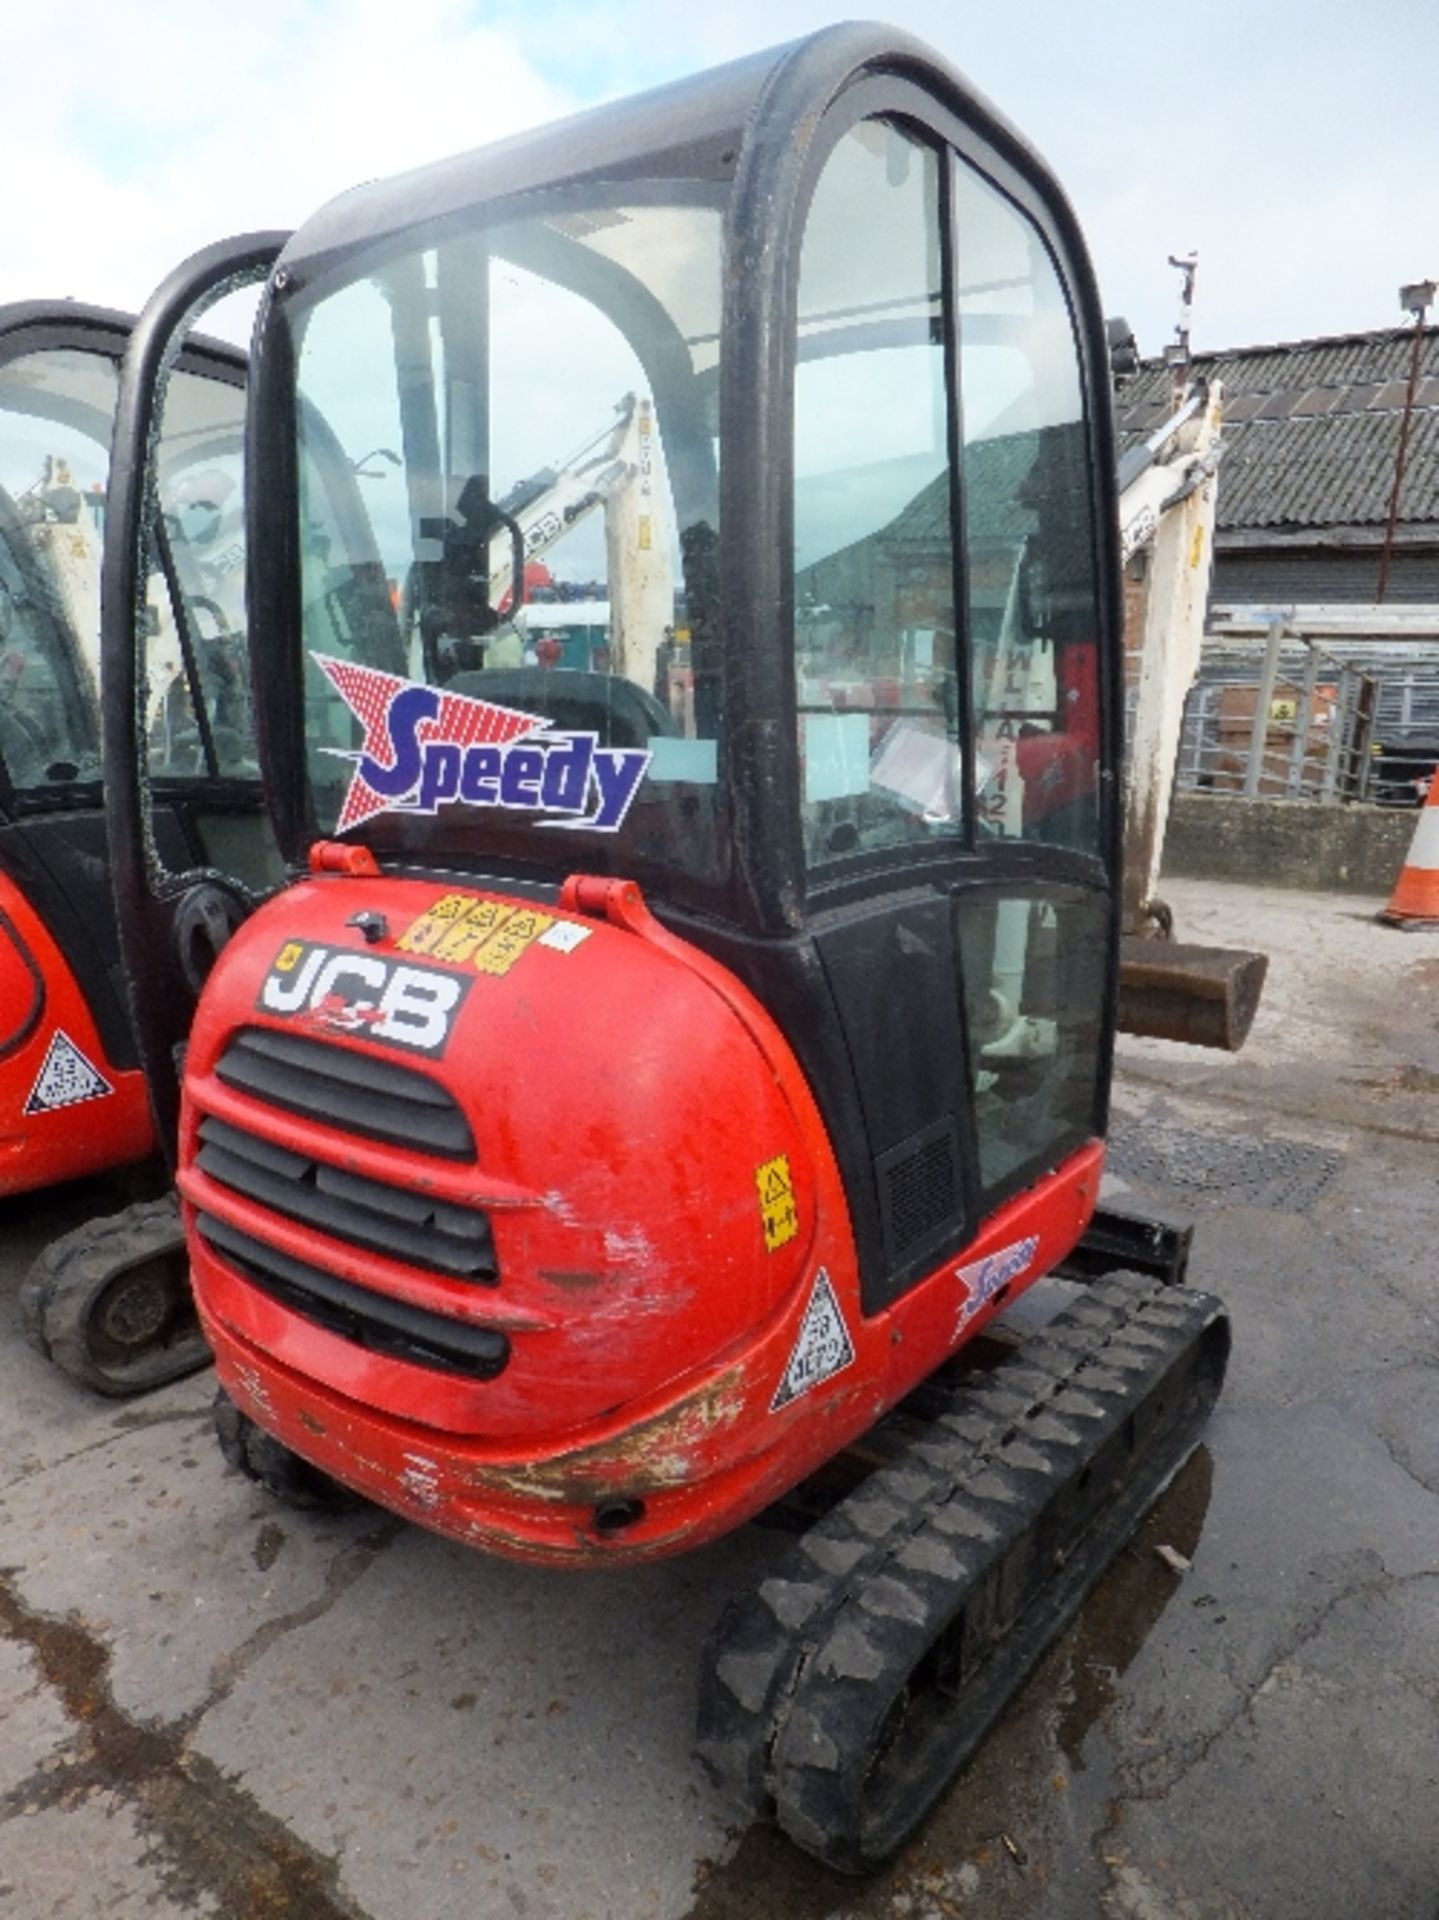 JCB 801.8 CTS mini digger (2011) 941 hrs WLCA112051861 1 bucket, expanding tracks, RDD, coded key - Image 9 of 10